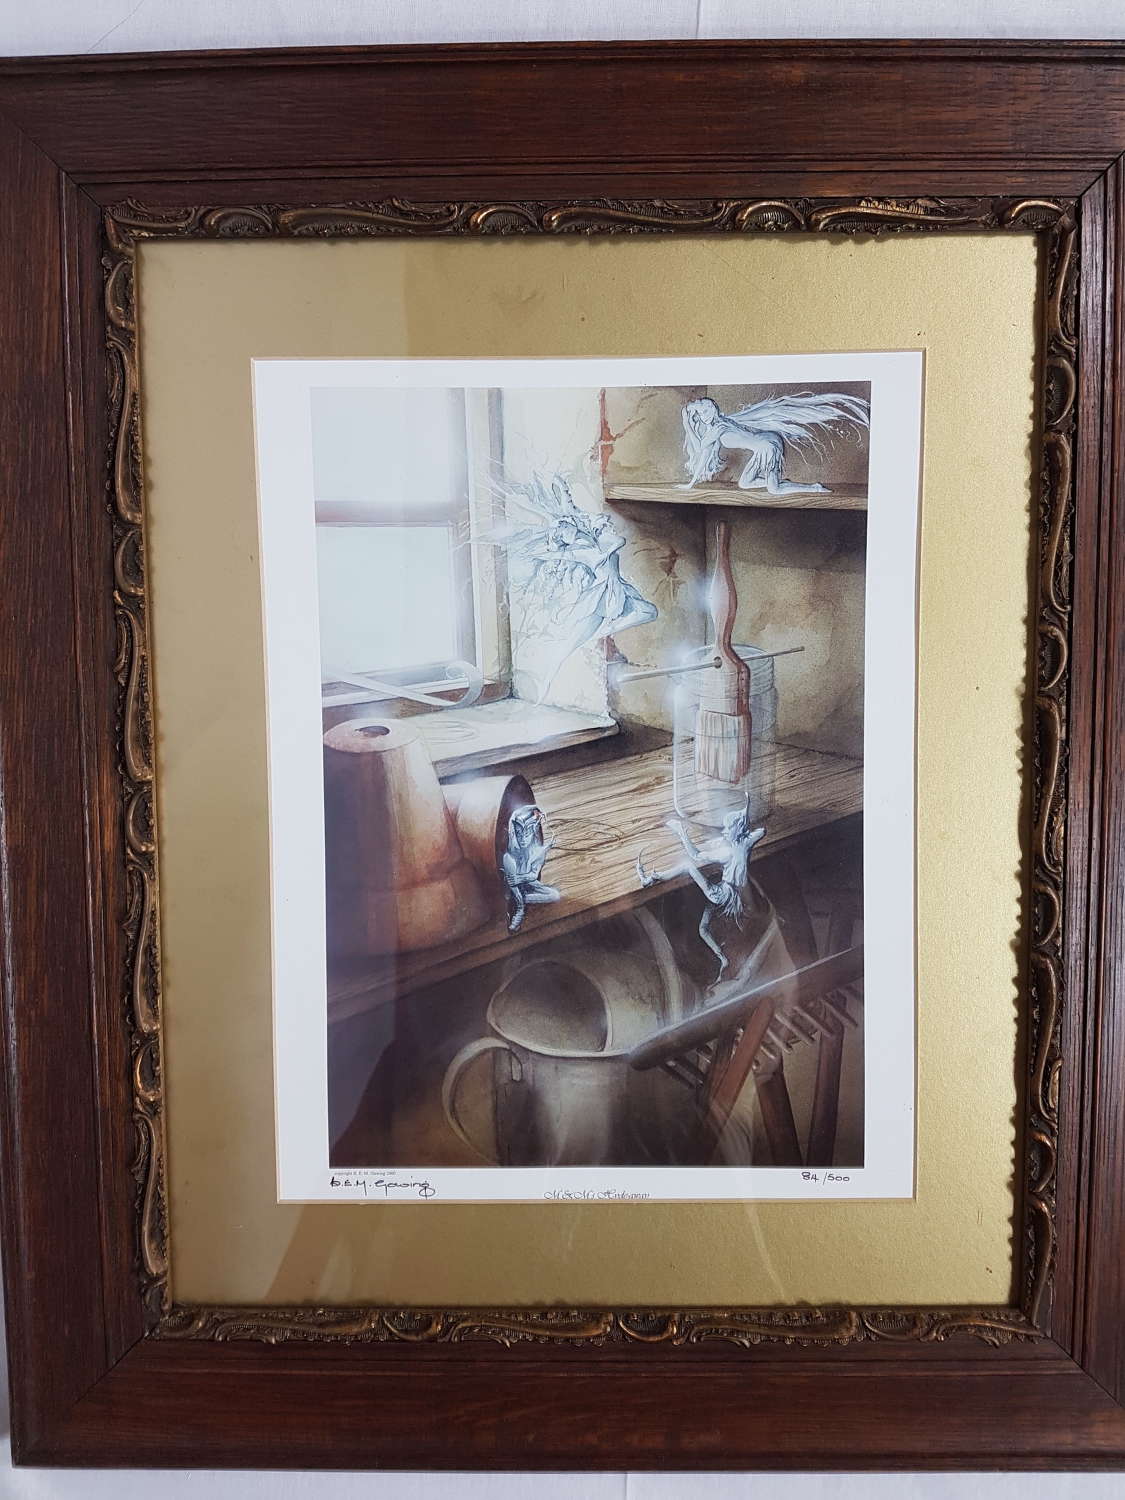 Limited Edition Print by B.E.M.Gowing.   Signed and Dated.